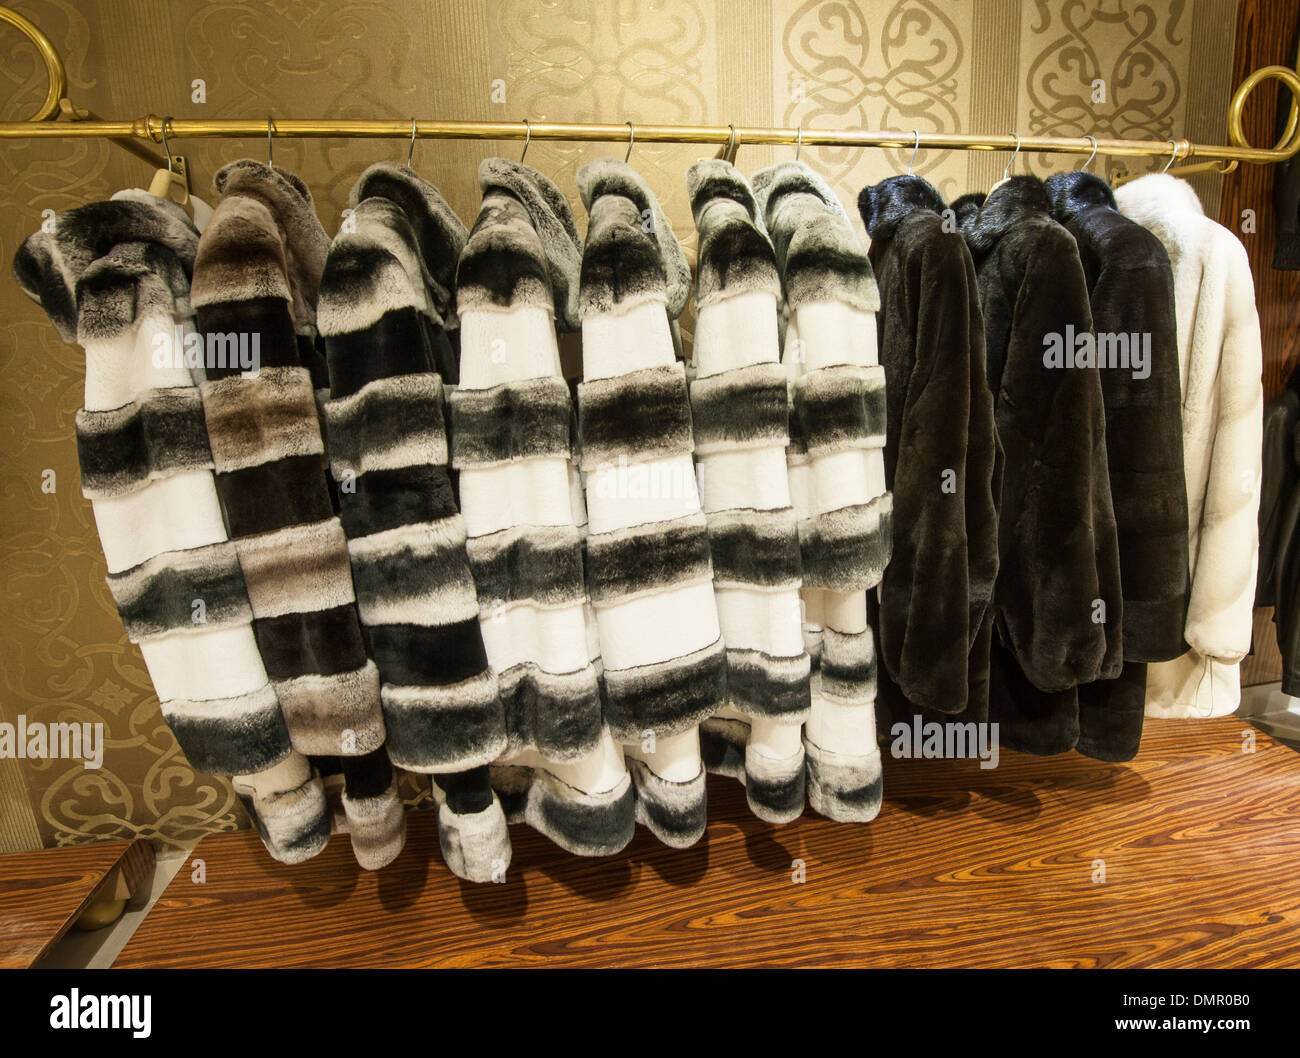 Expensive genuine fur coats hanging on a rail in shop Stock Photo